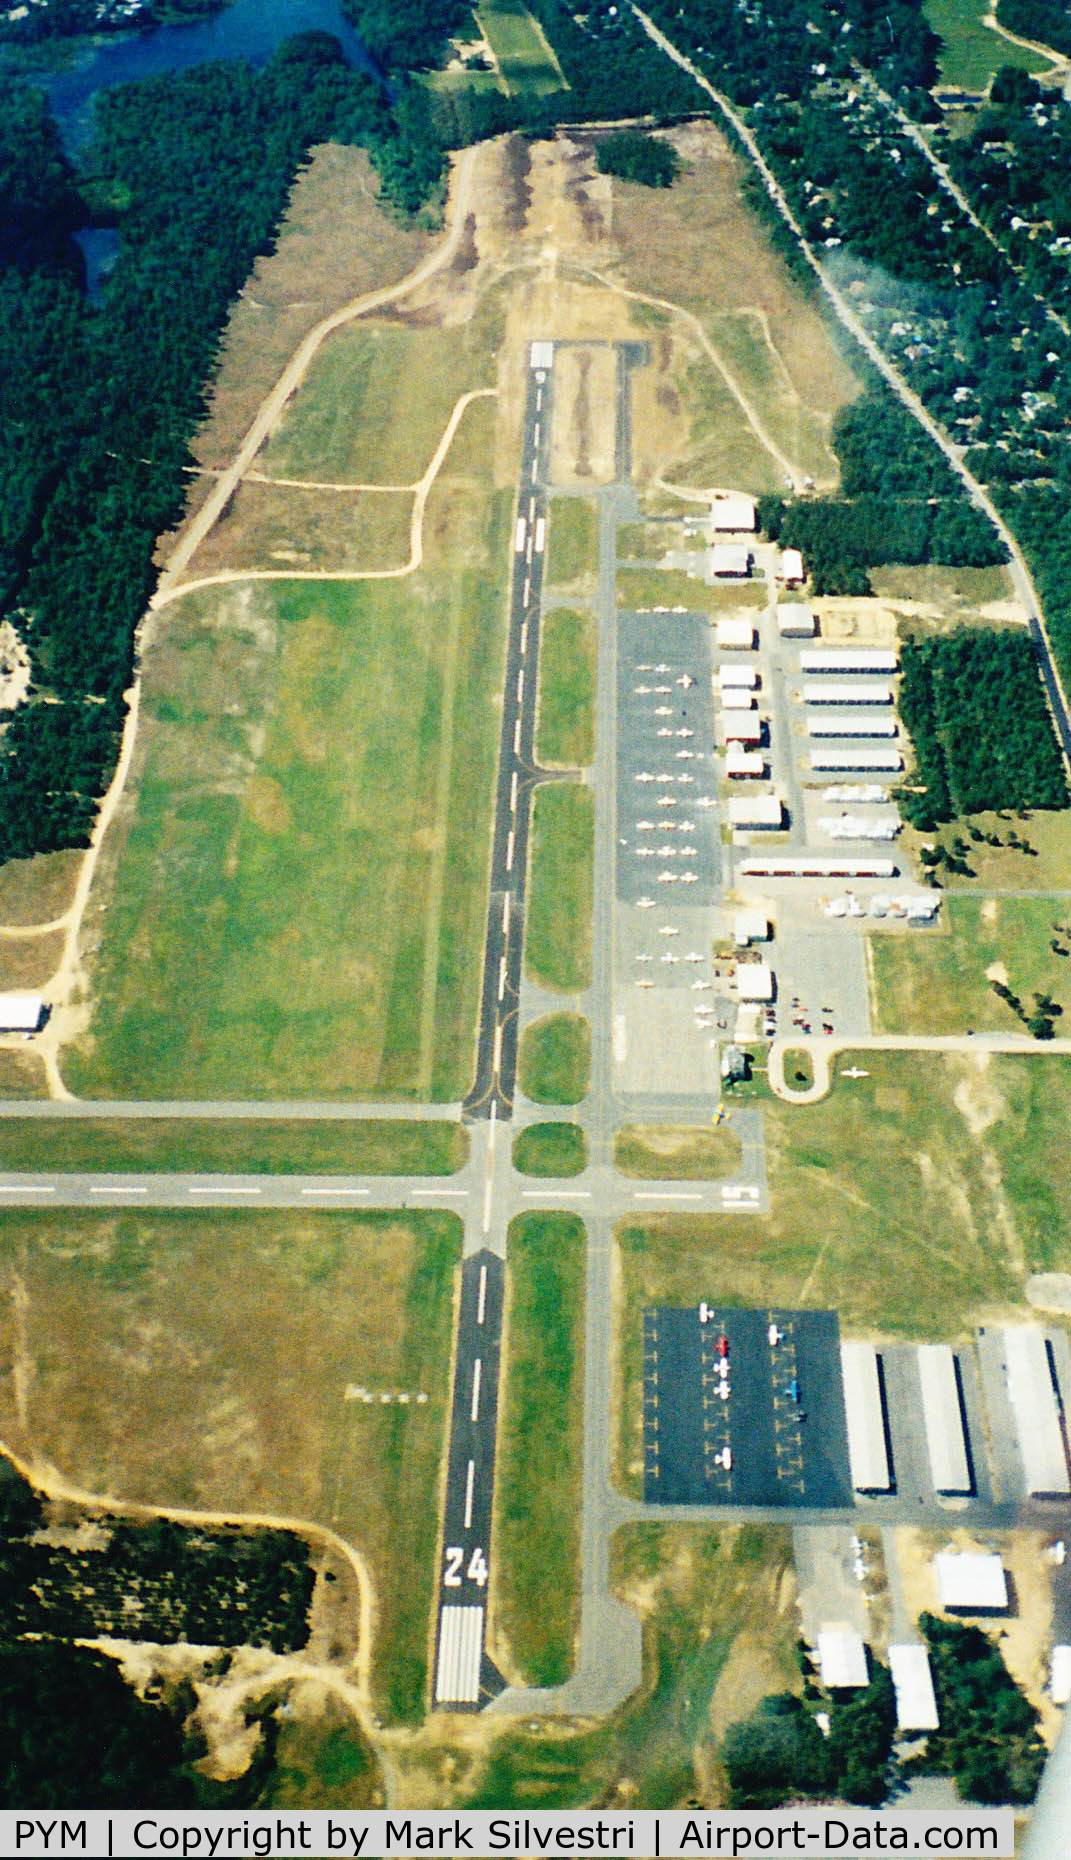 Plymouth Municipal Airport (PYM) - High above RW 24/06 at Plymouth, MA